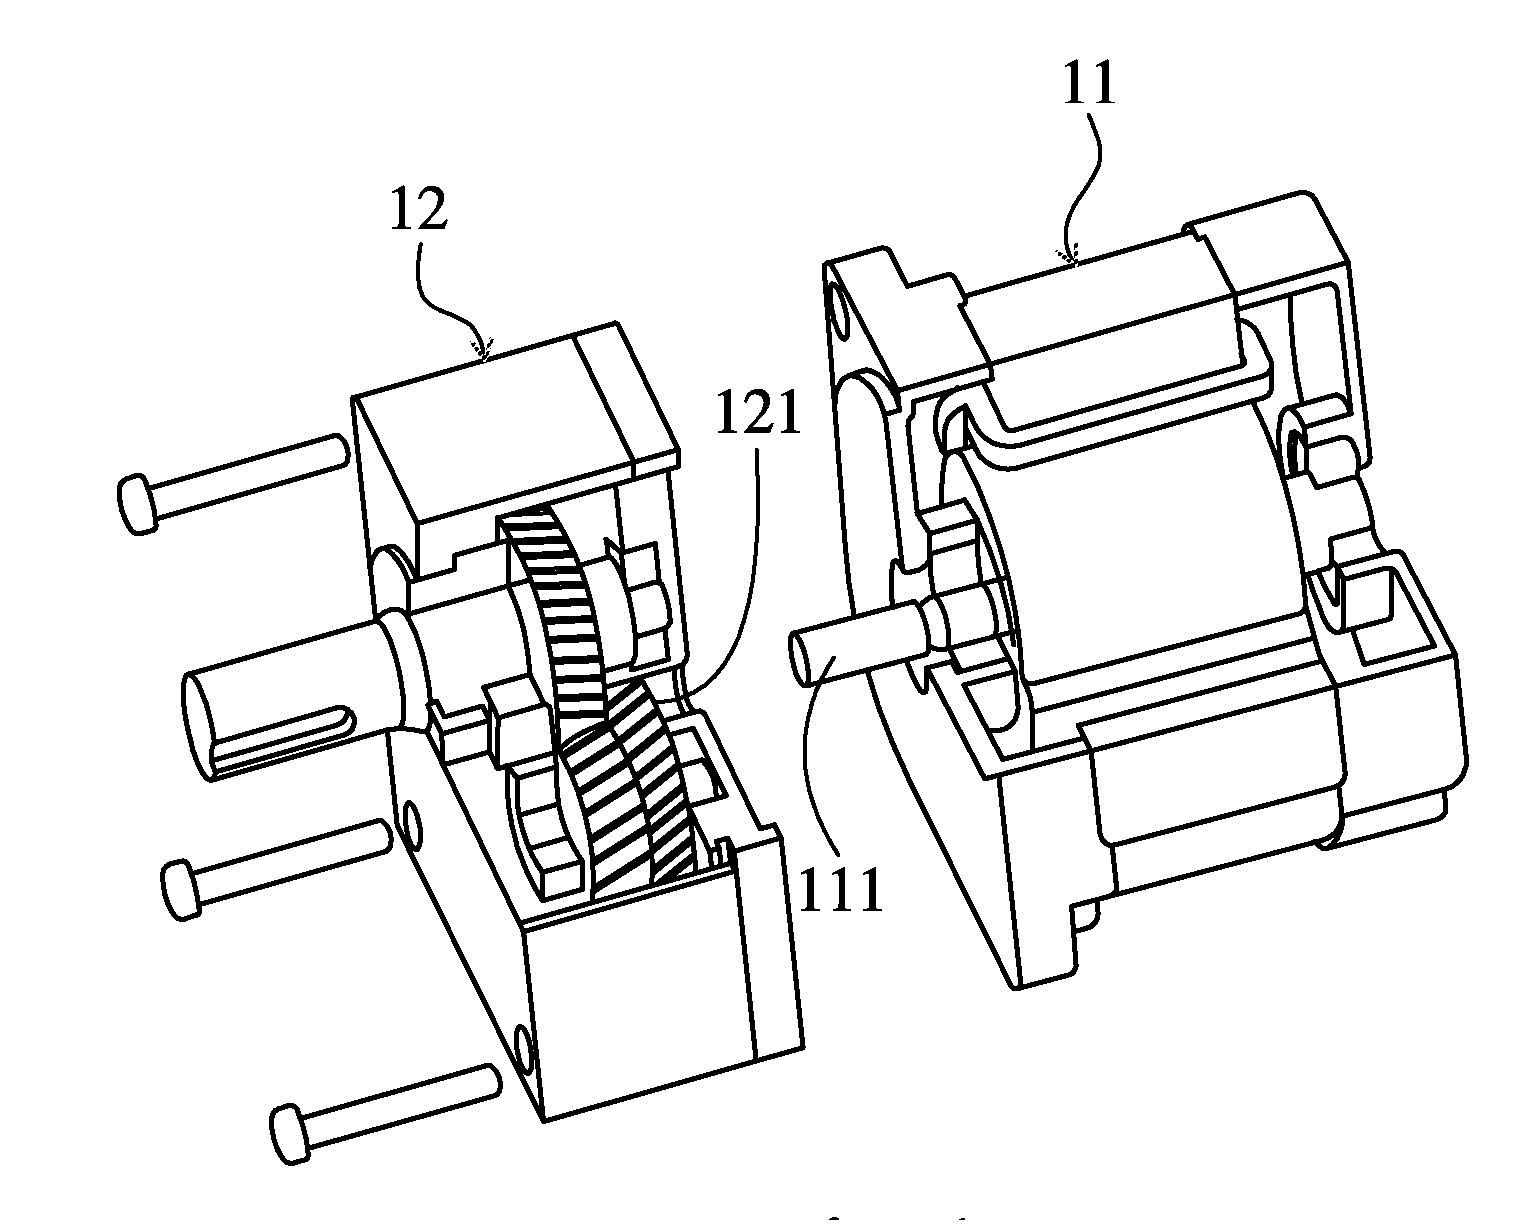 Ac motor with reduction mechanism